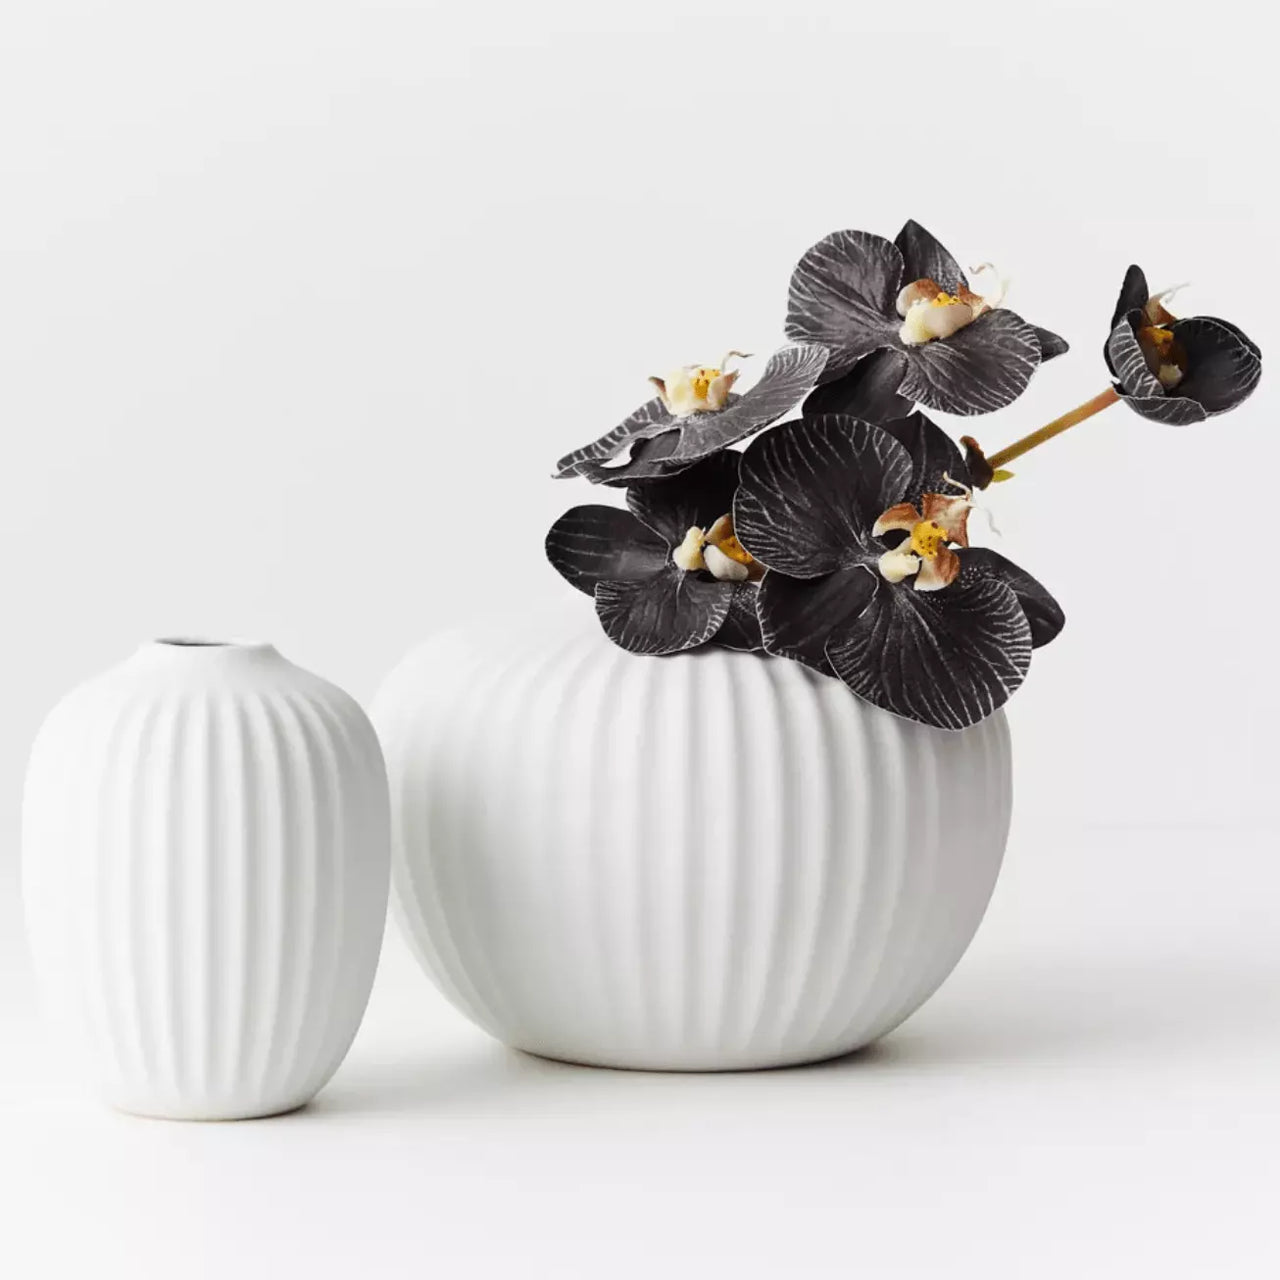 Two Floral Interiors Taza Vases - White with black flowers in them.